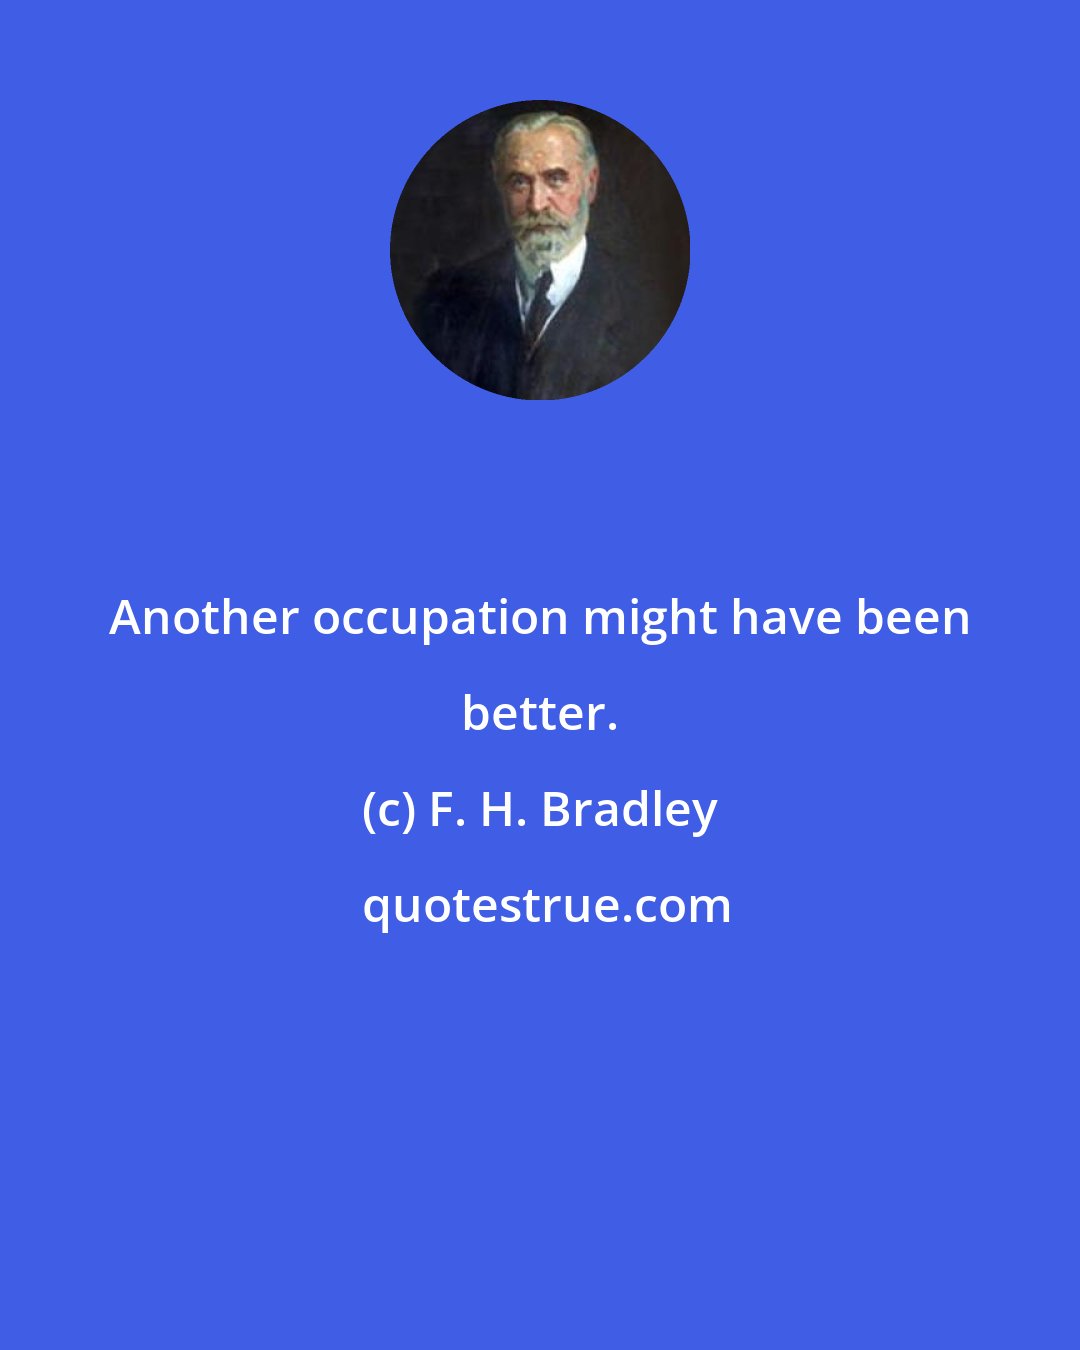 F. H. Bradley: Another occupation might have been better.